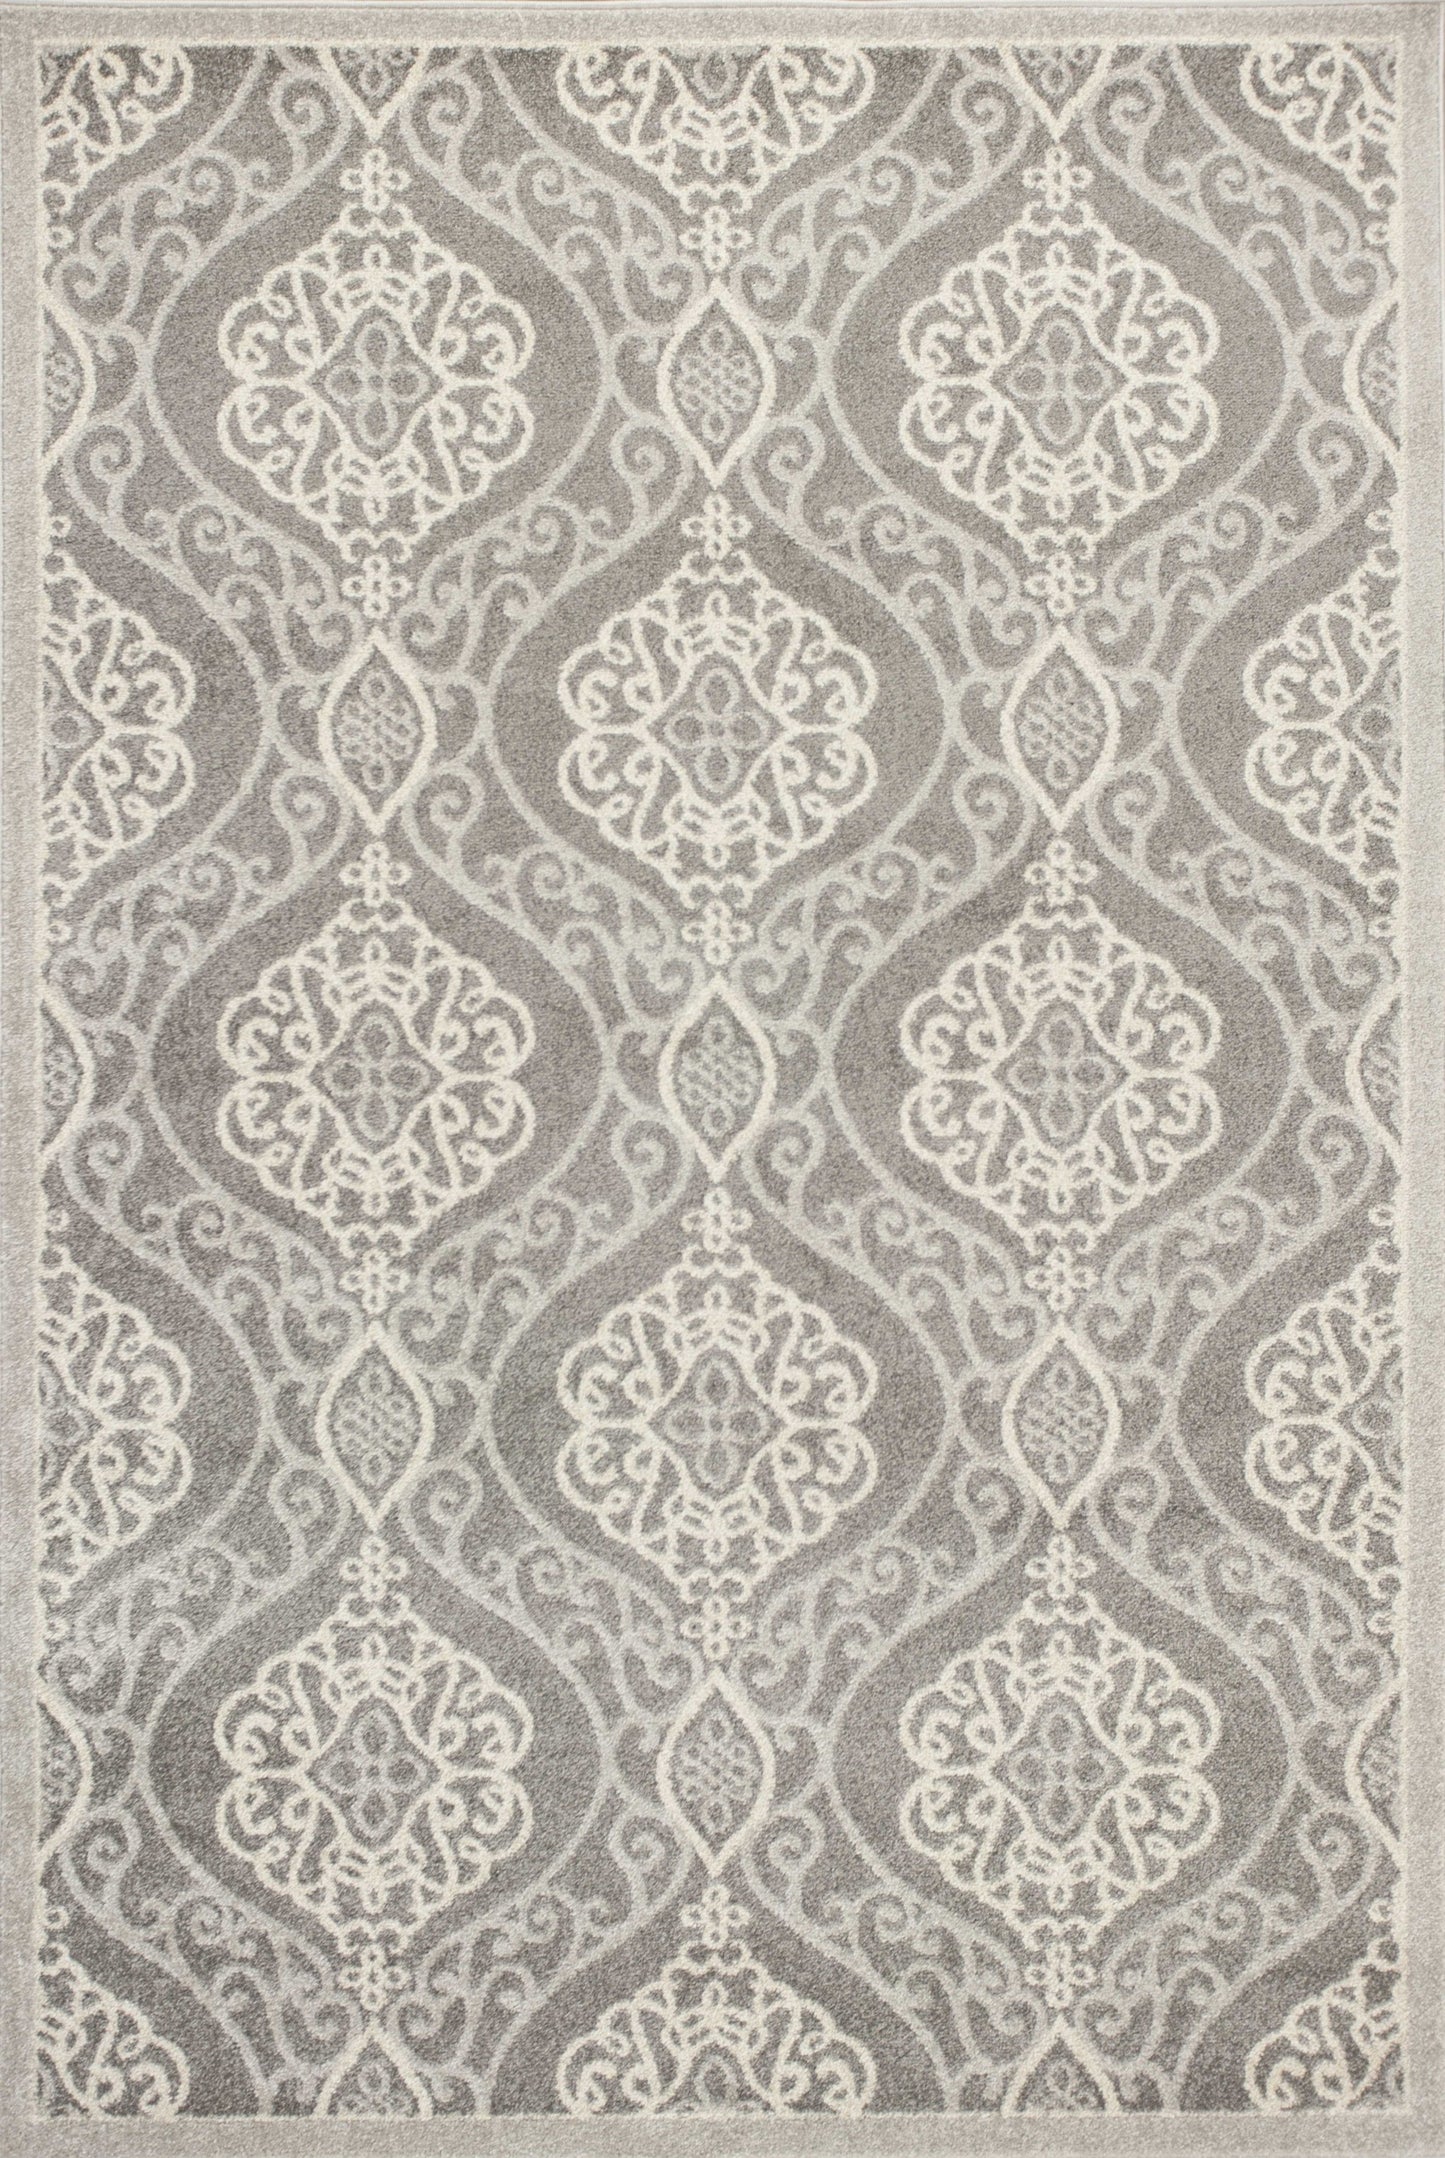 7'X10' Silver Grey Machine Woven Uv Treated Floral Ogee Indoor Outdoor Area Rug